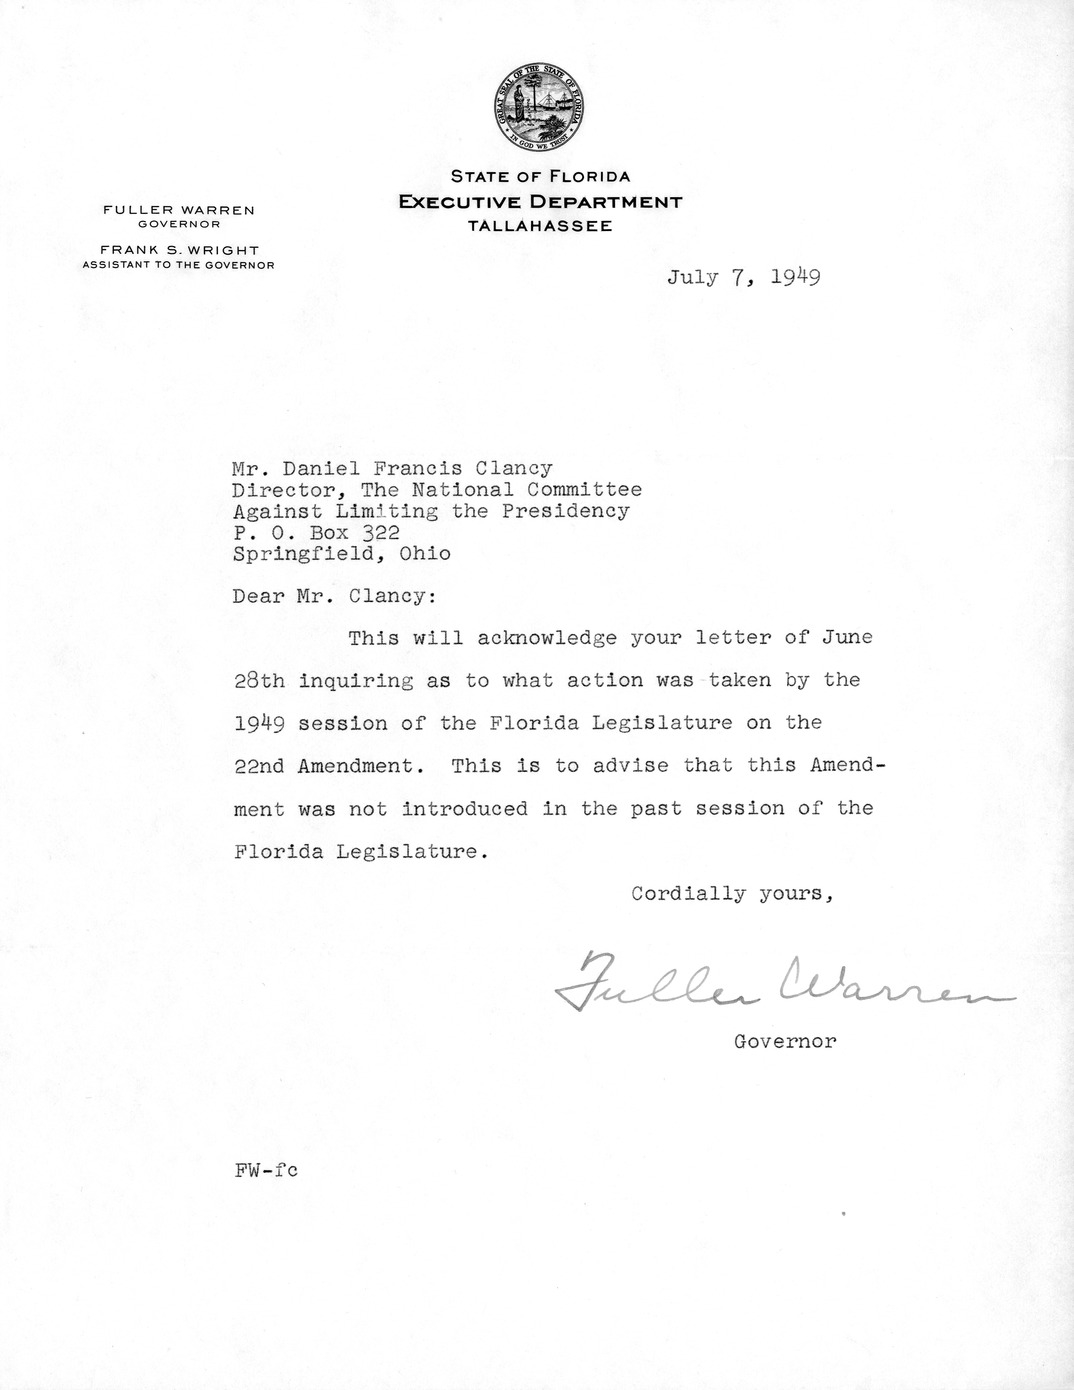 Letter from Governor Fuller Warren to Daniel F. Clancy